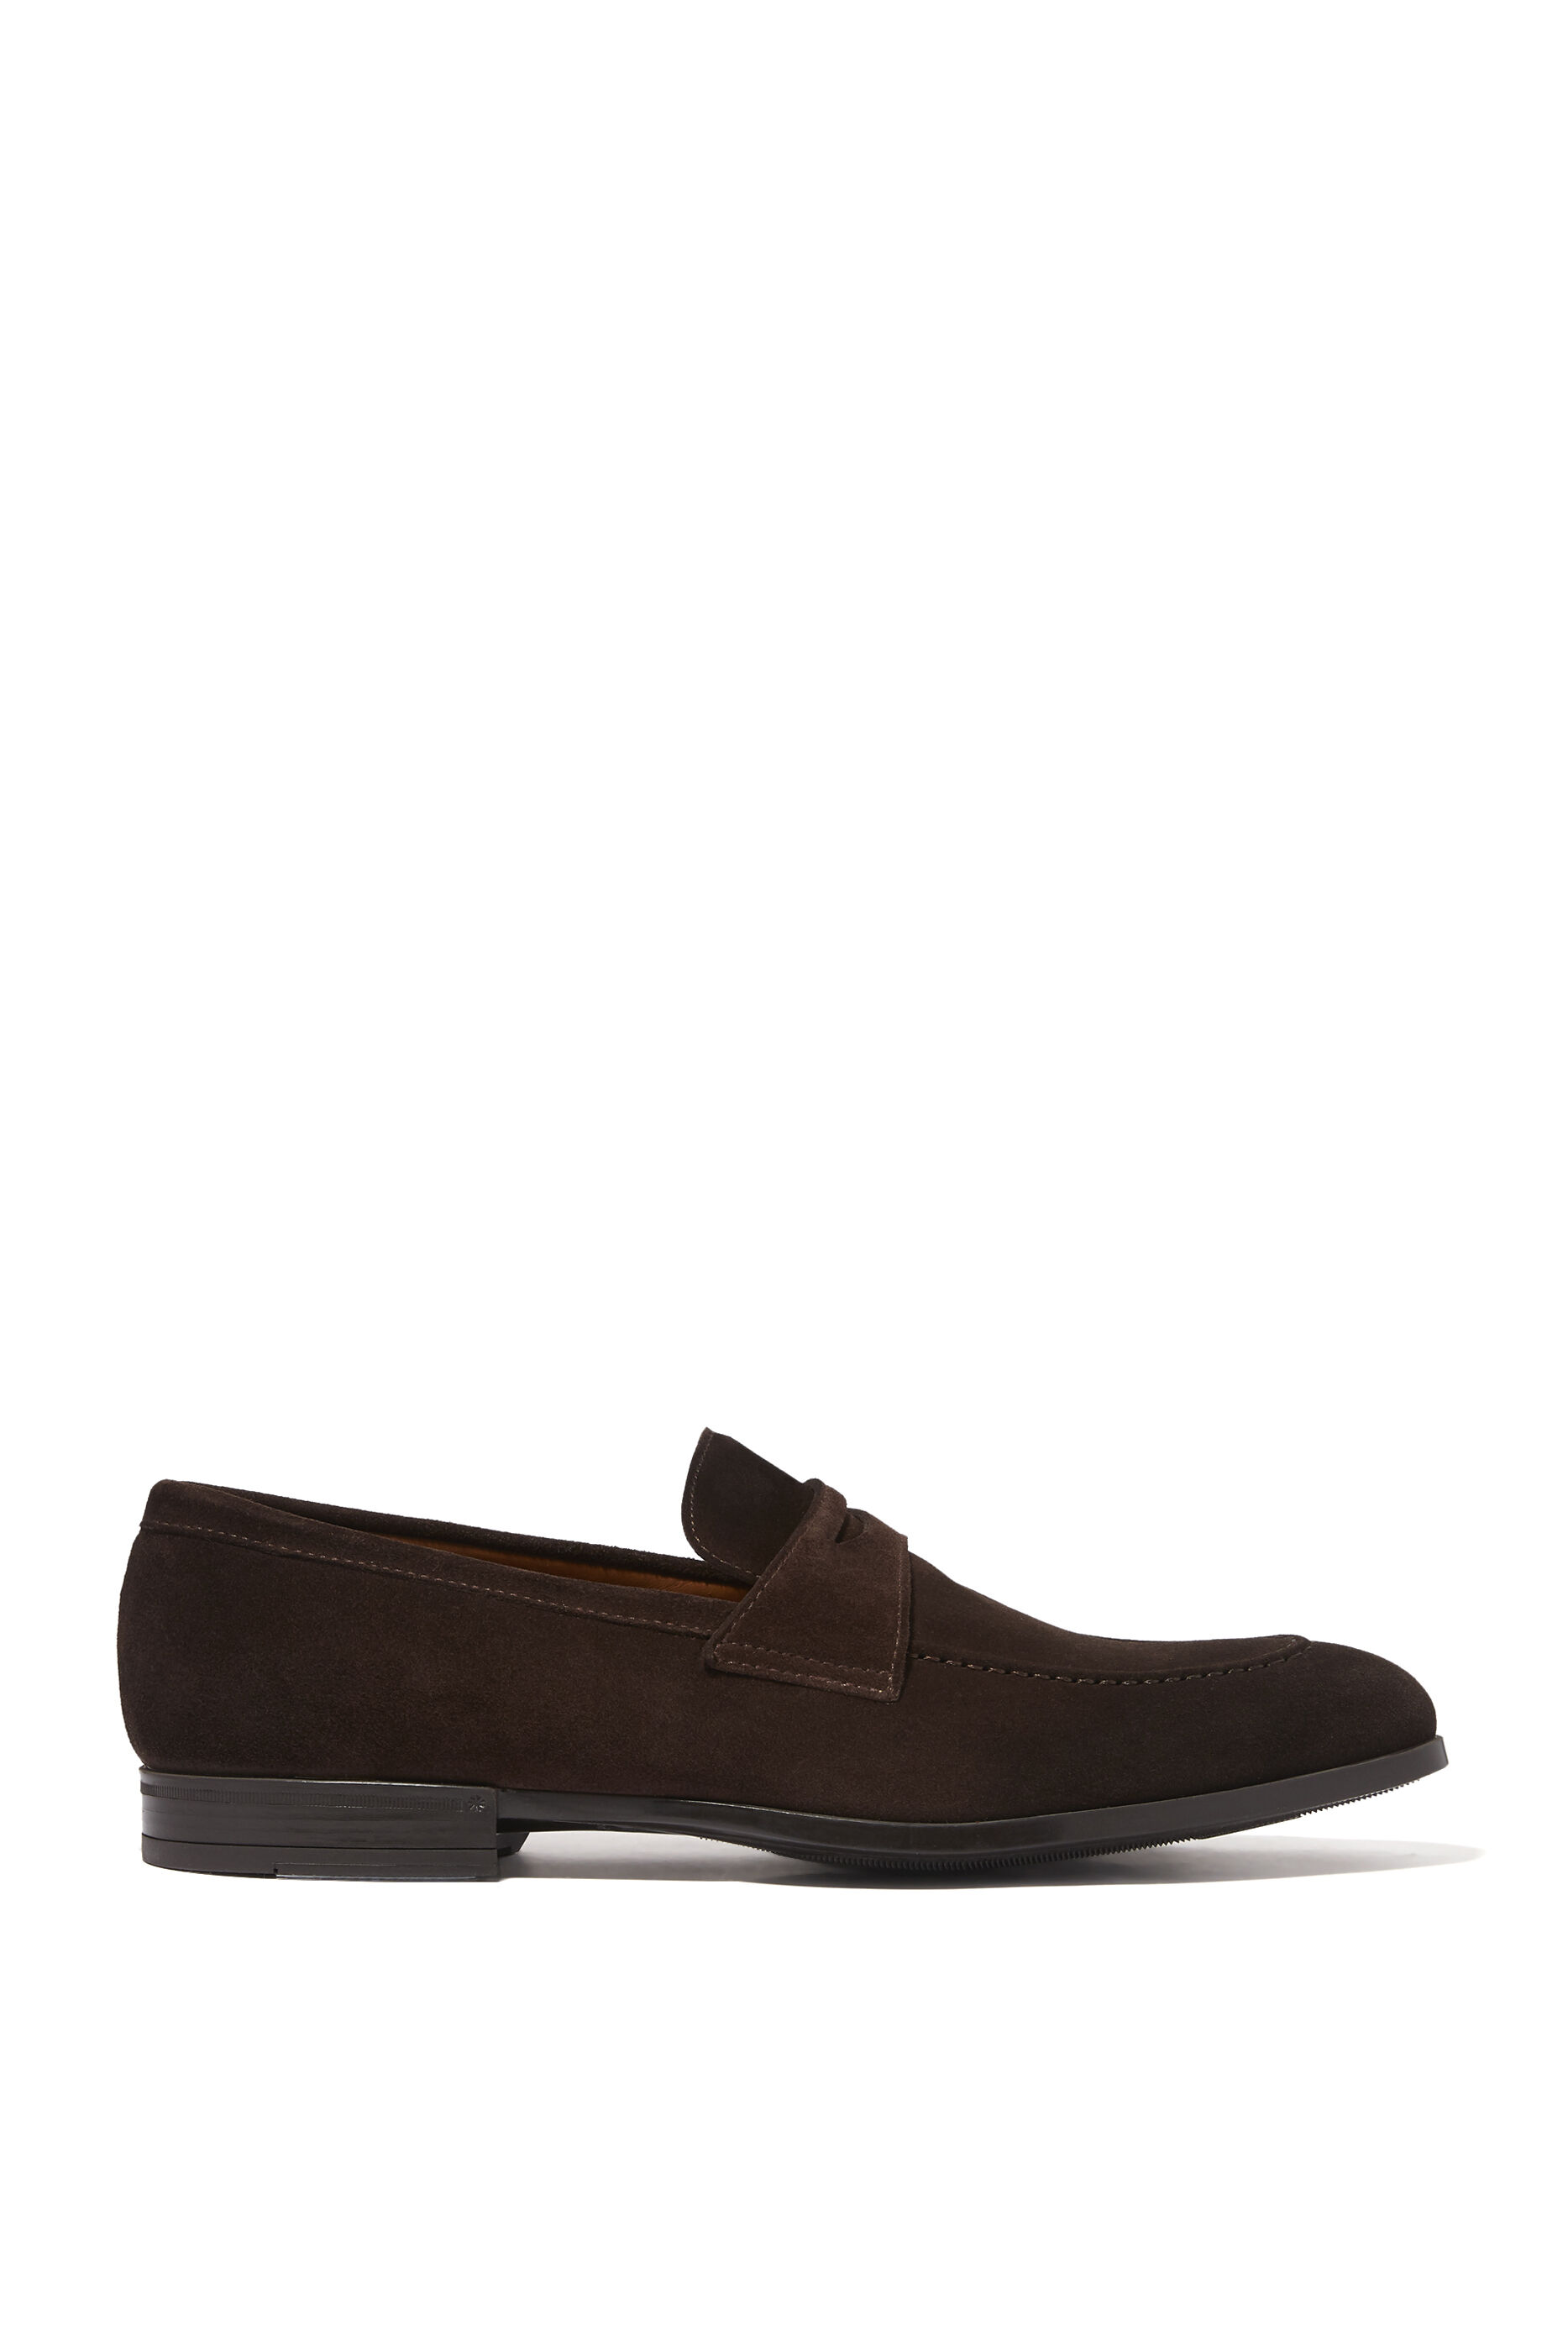 mens penny loafers sale